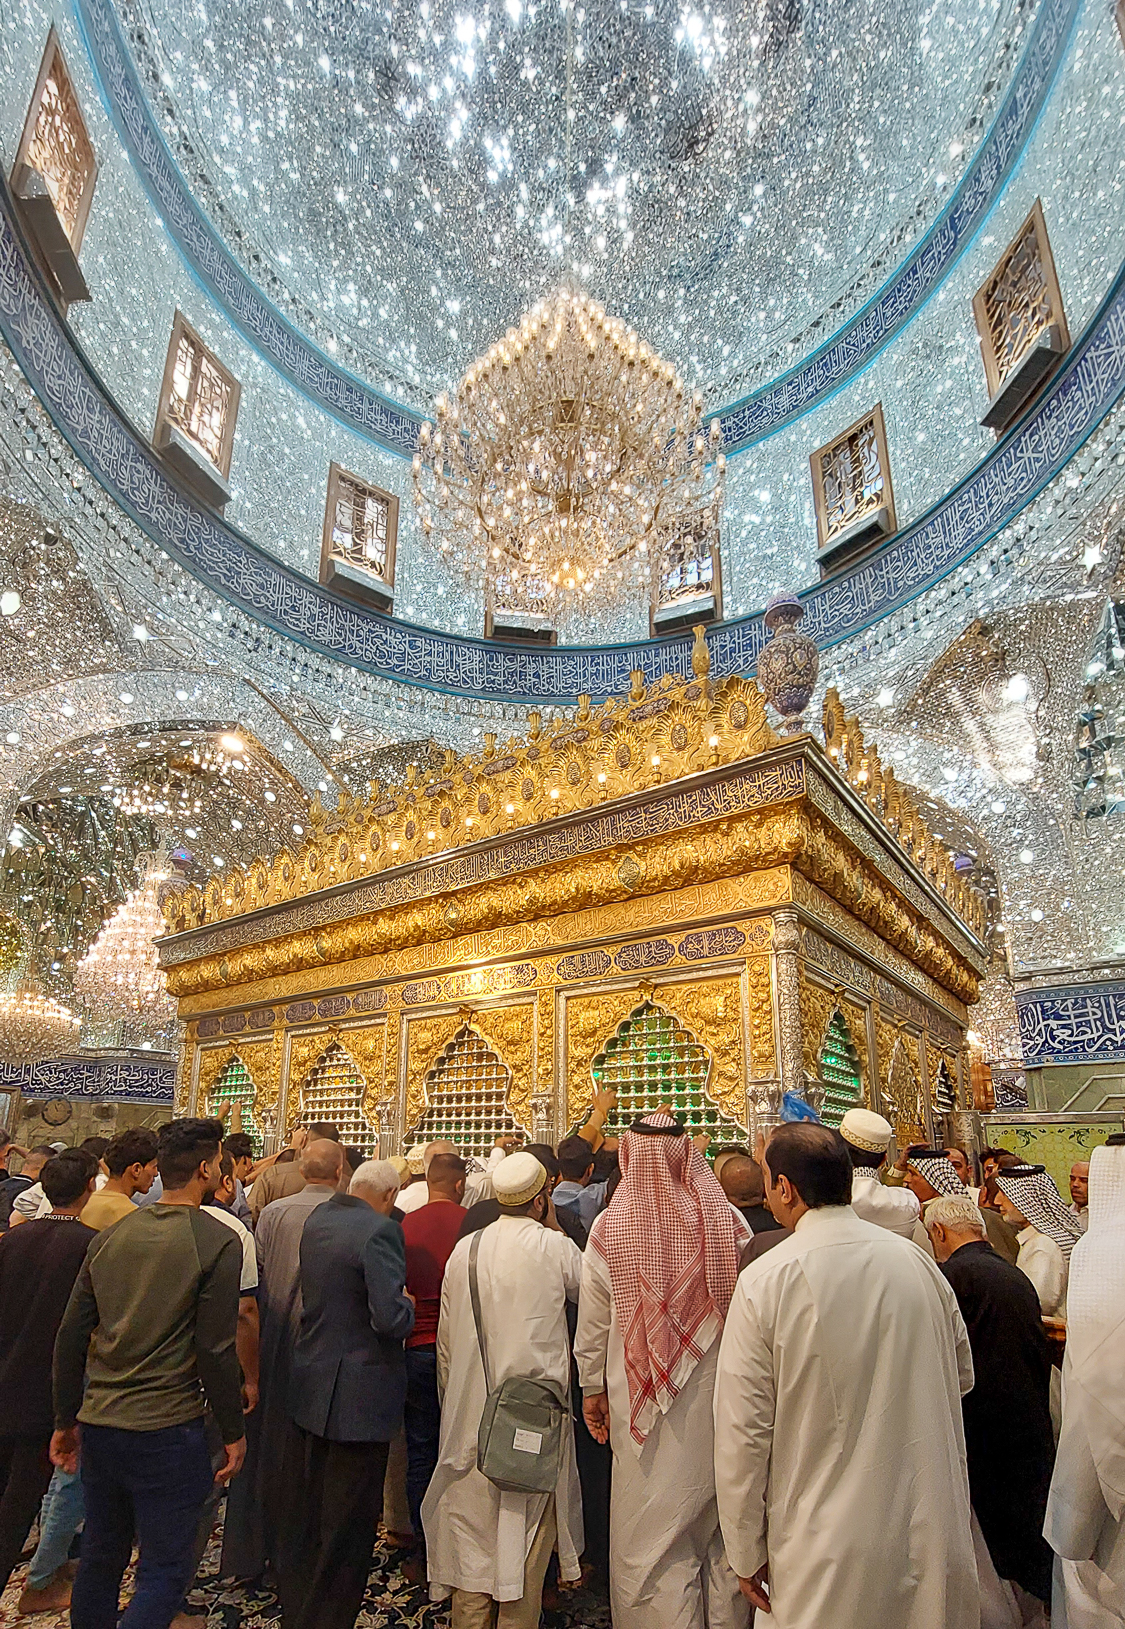 <span  class="uc_style_uc_tiles_grid_image_elementor_uc_items_attribute_title" style="color:#ffffff;">Shrine of Imam Hossain</span>